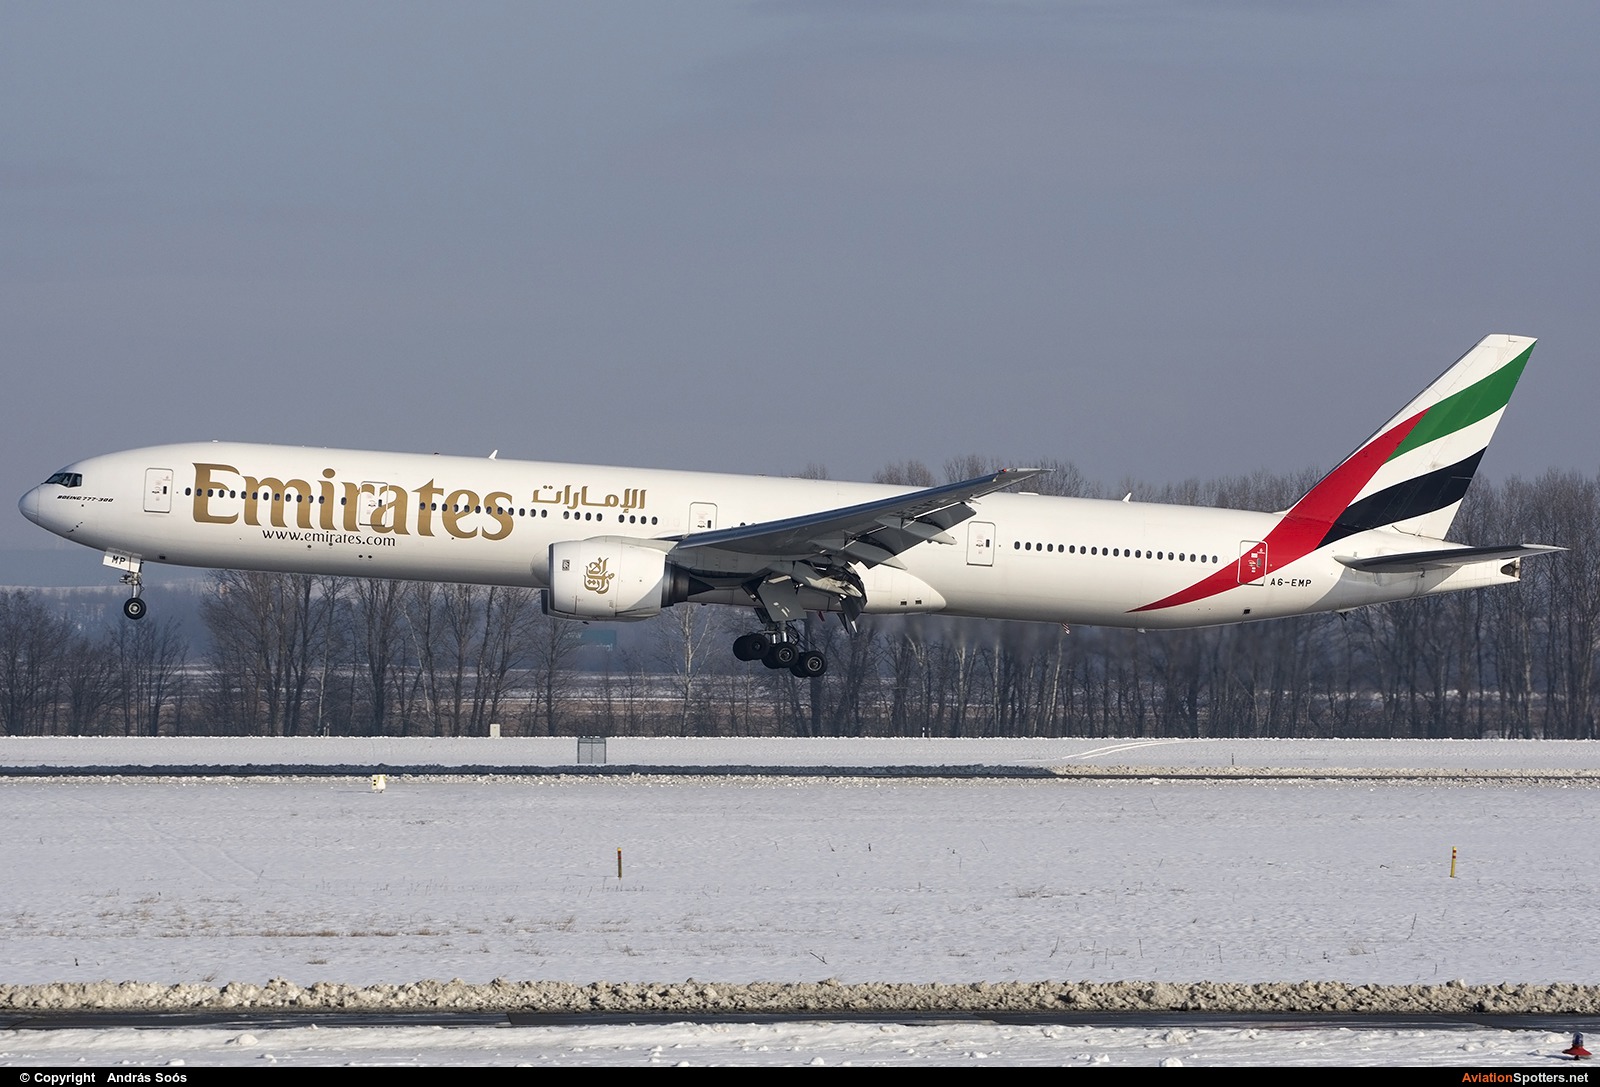 Emirates Airlines  -  777-300  (A6-EMP) By András Soós (sas1965)